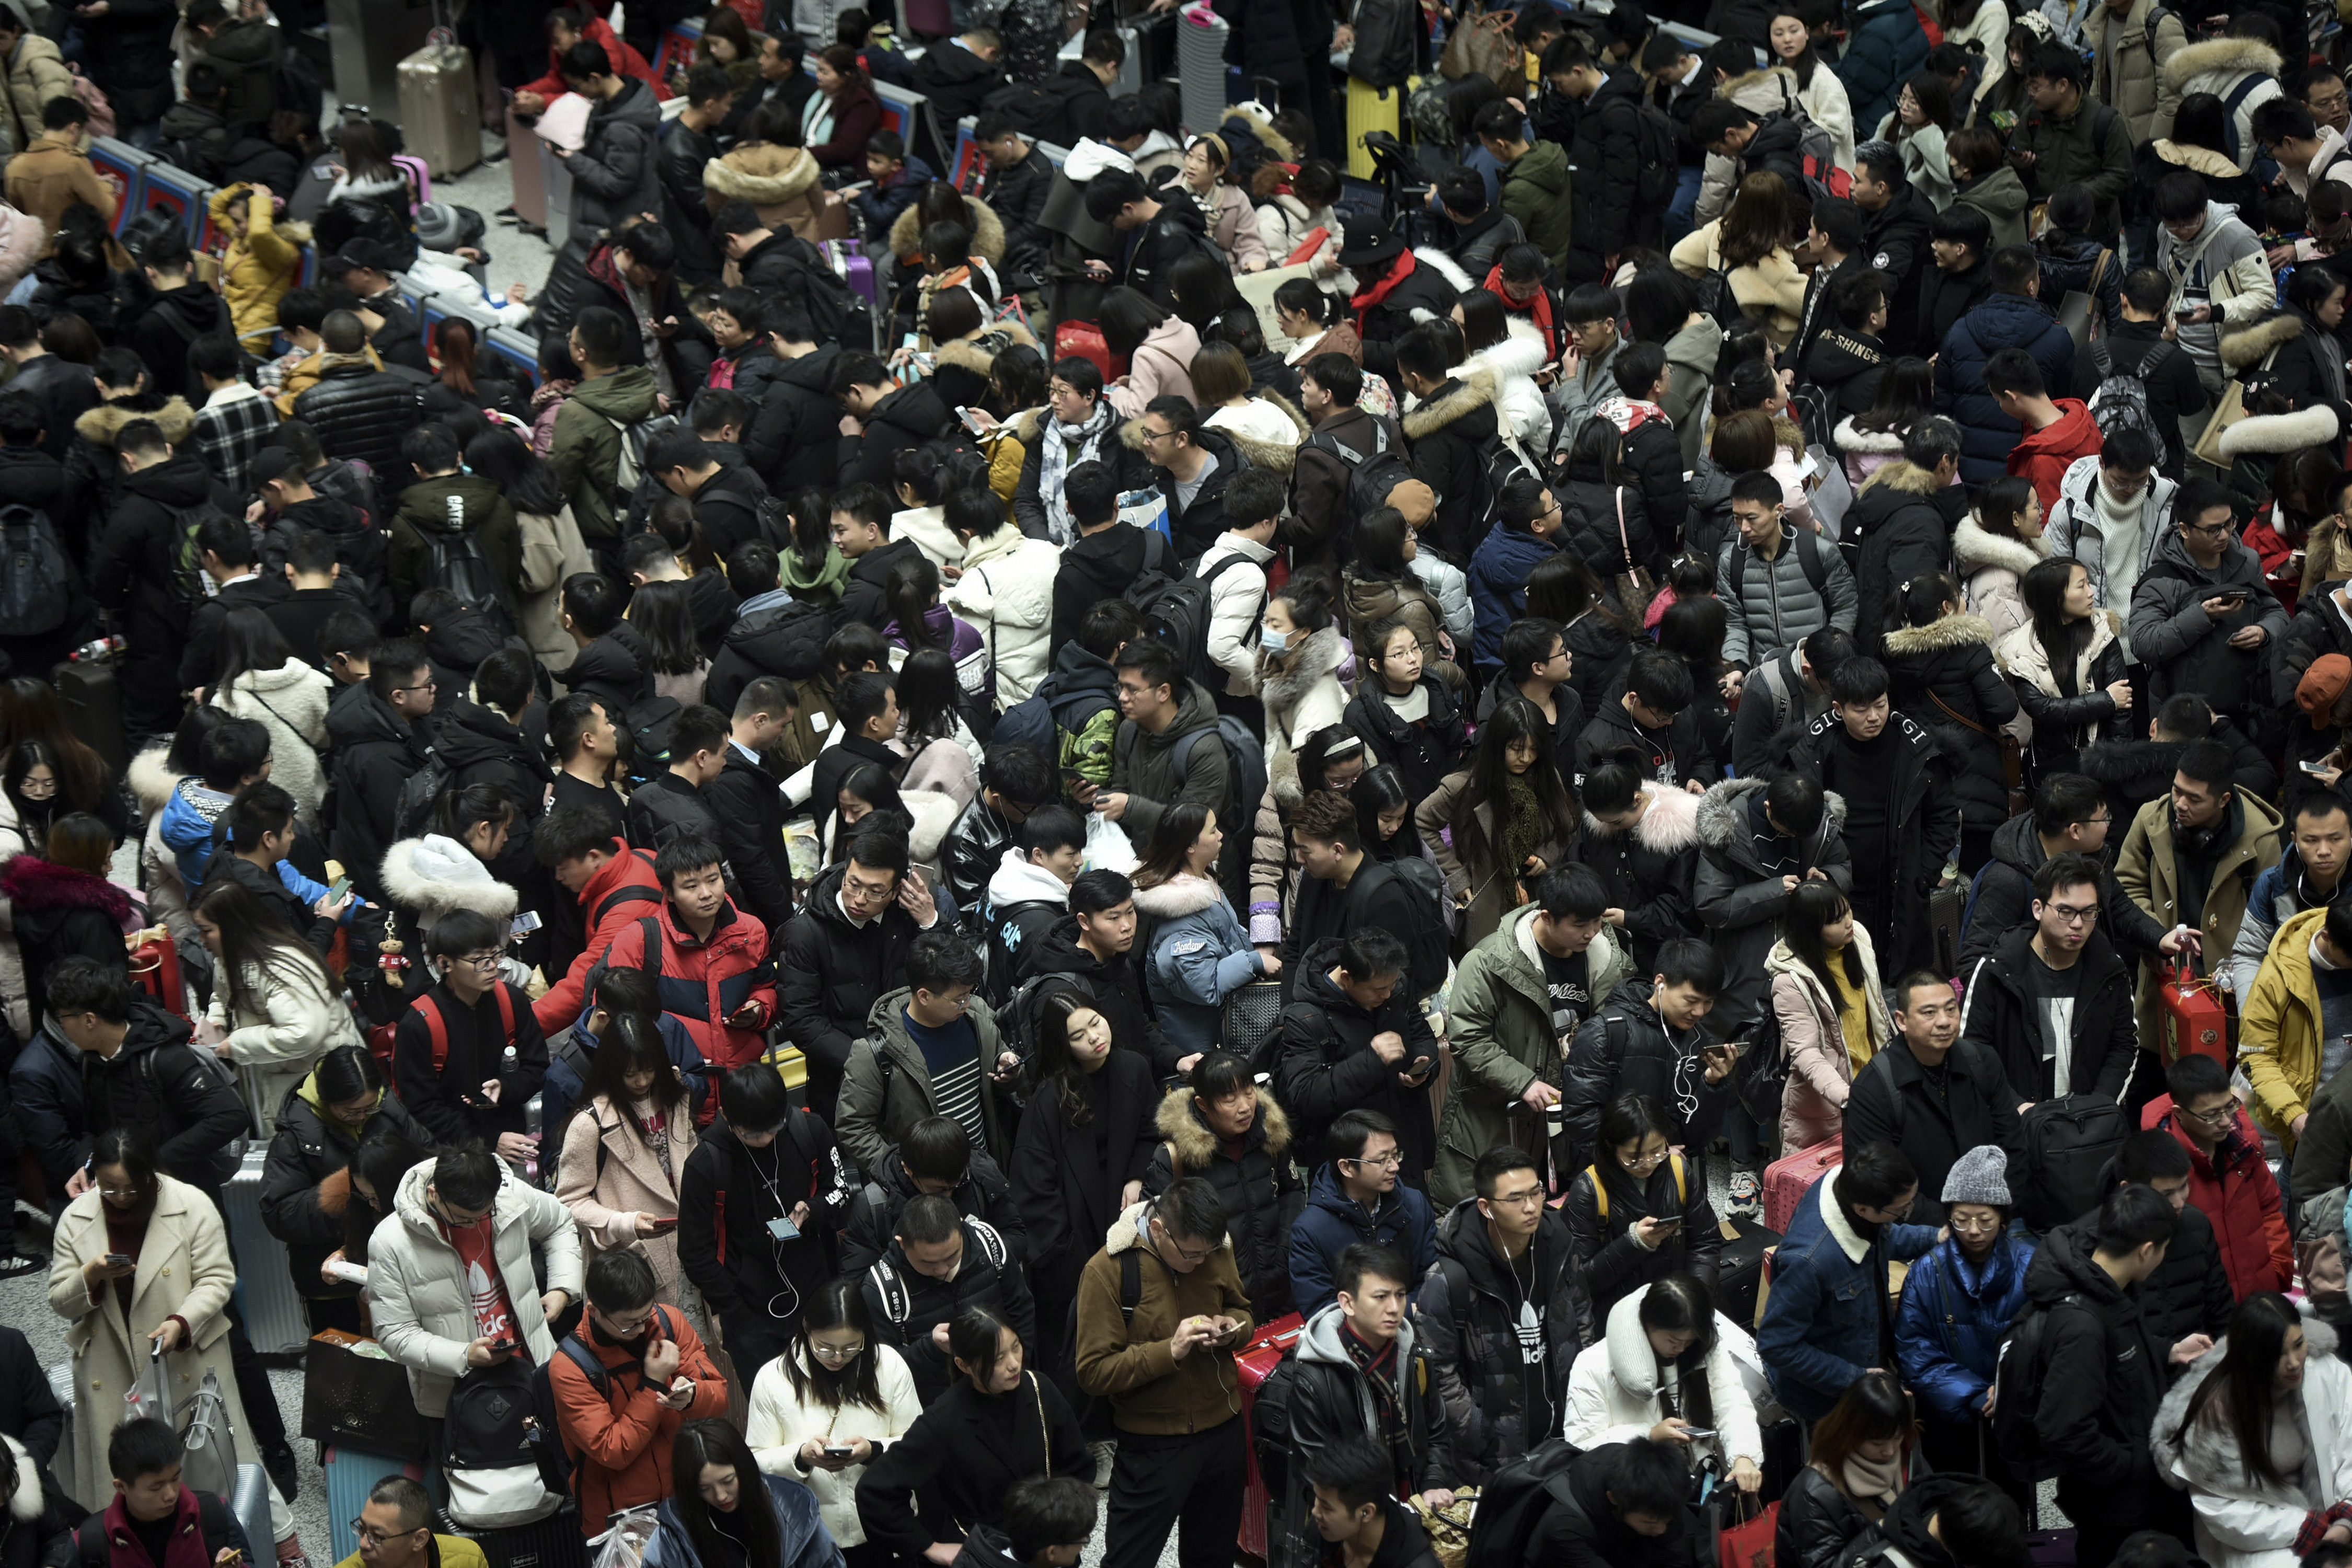 Chinese travelers crowd at a railway station as they wait for their trains in Hangzhou in east China's Zhejiang province, Sunday, Feb. 10, 2019. Millions of Chinese are start returning to work after spending a weeklong Lunar New Year holiday with families in their hometown. (Chinatopix via AP)